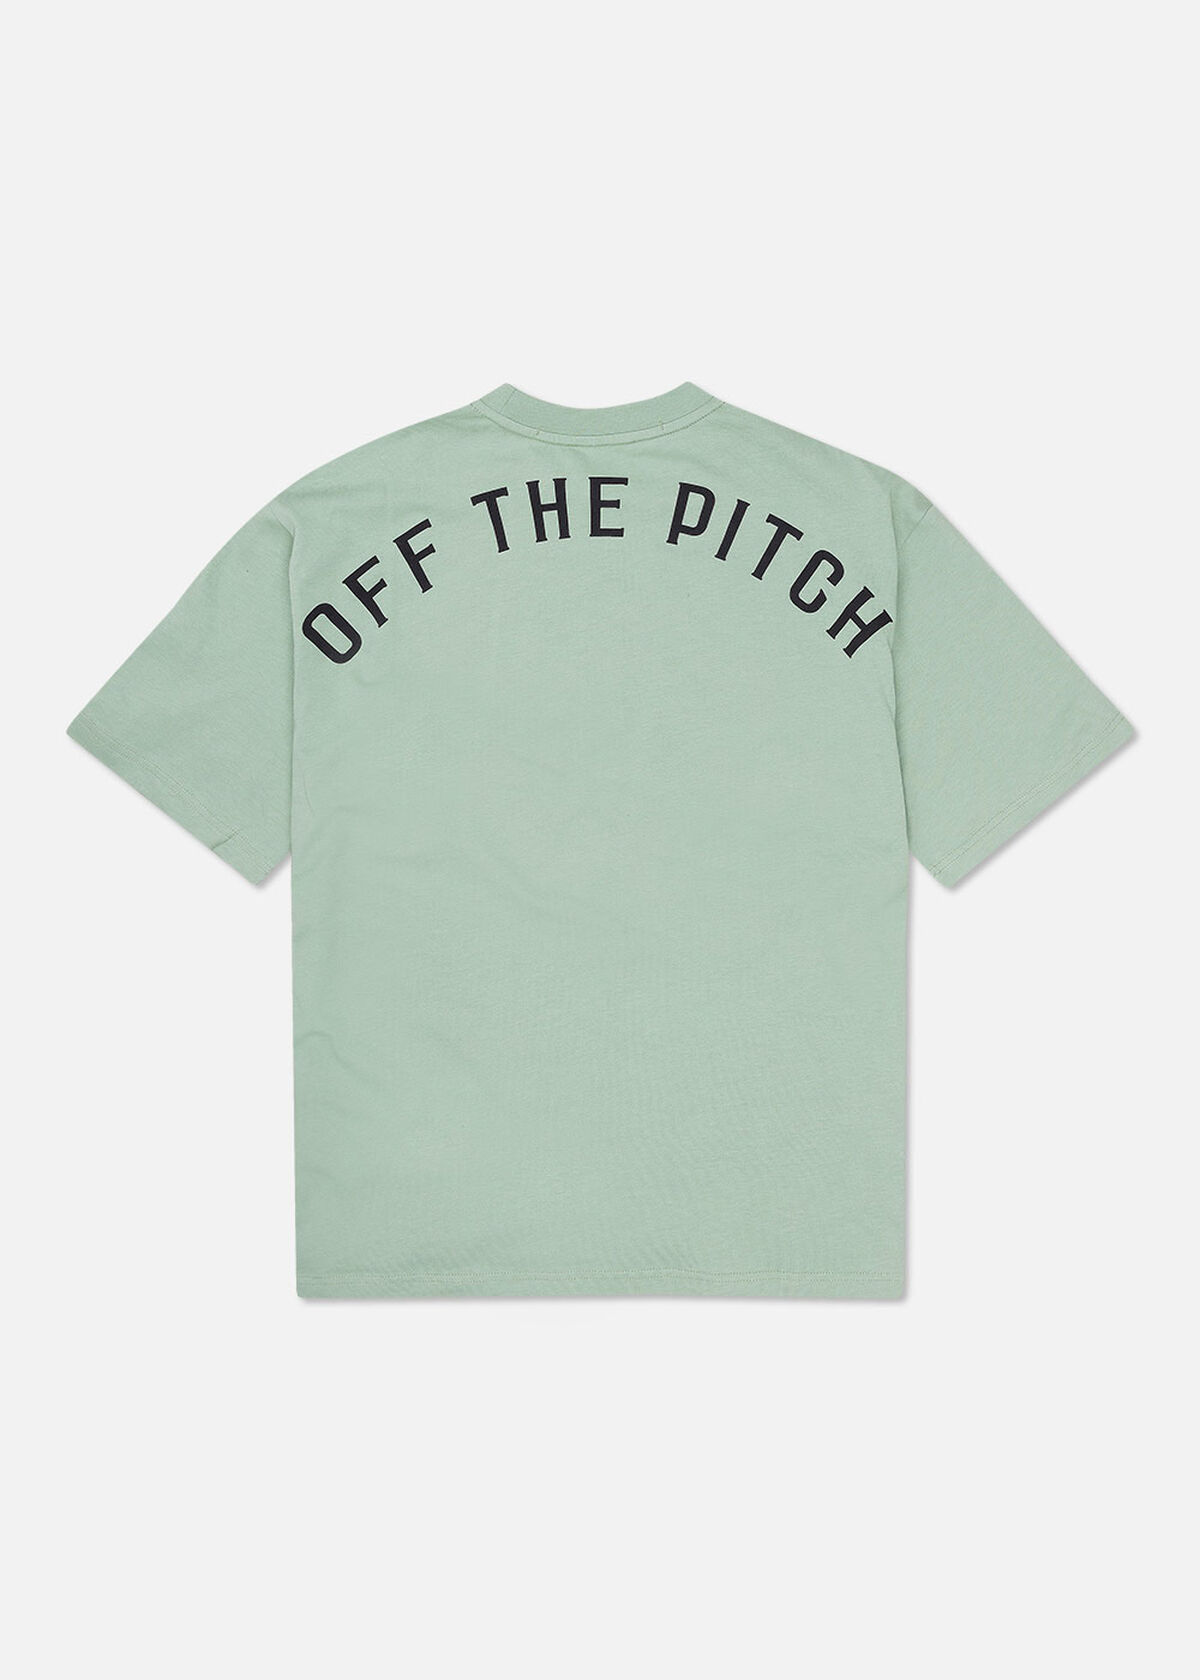 Loose Fit Pitch Tee - 100% Cotton, Green/White, hi-res